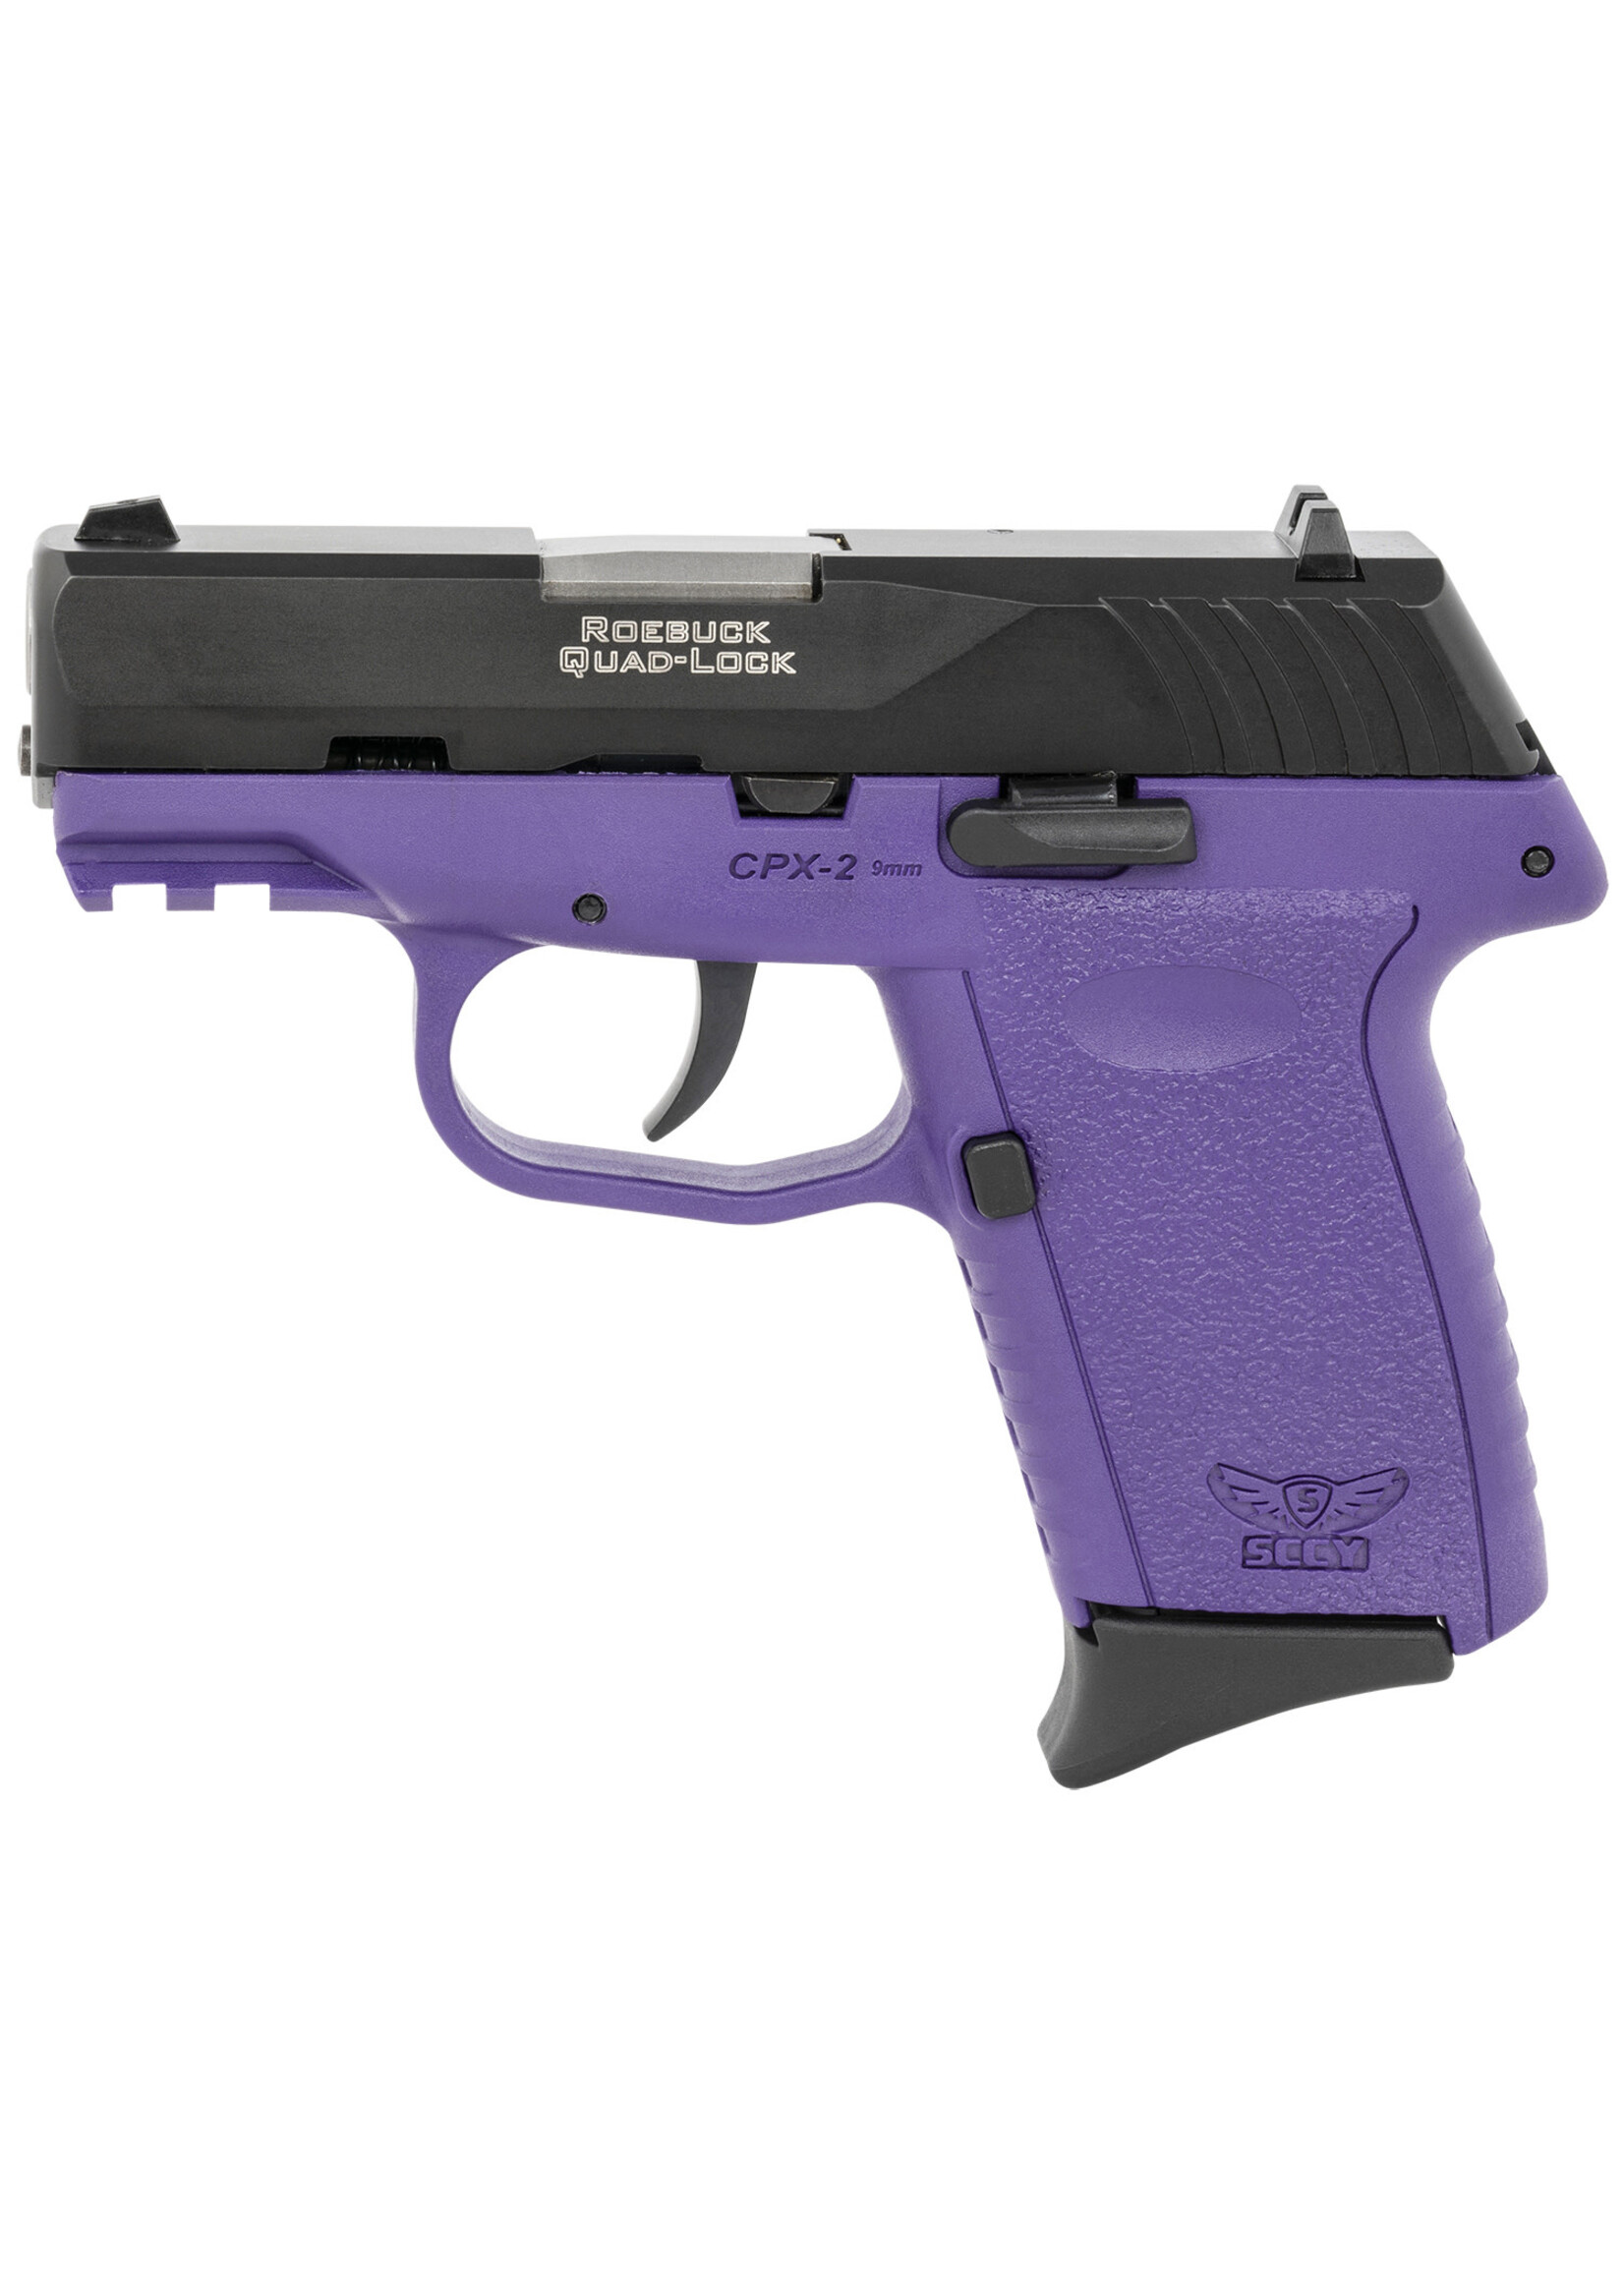 Sccy Industries SCCY Industries CPX-2 Gen3 9mm Luger Caliber with 3.10" Barrel, 10+1 Capacity, Purple Finish Picatinny Rail Frame, Serrated Black Nitride Stainless Steel Slide, Polymer Grip & No Manual Thumb Safety